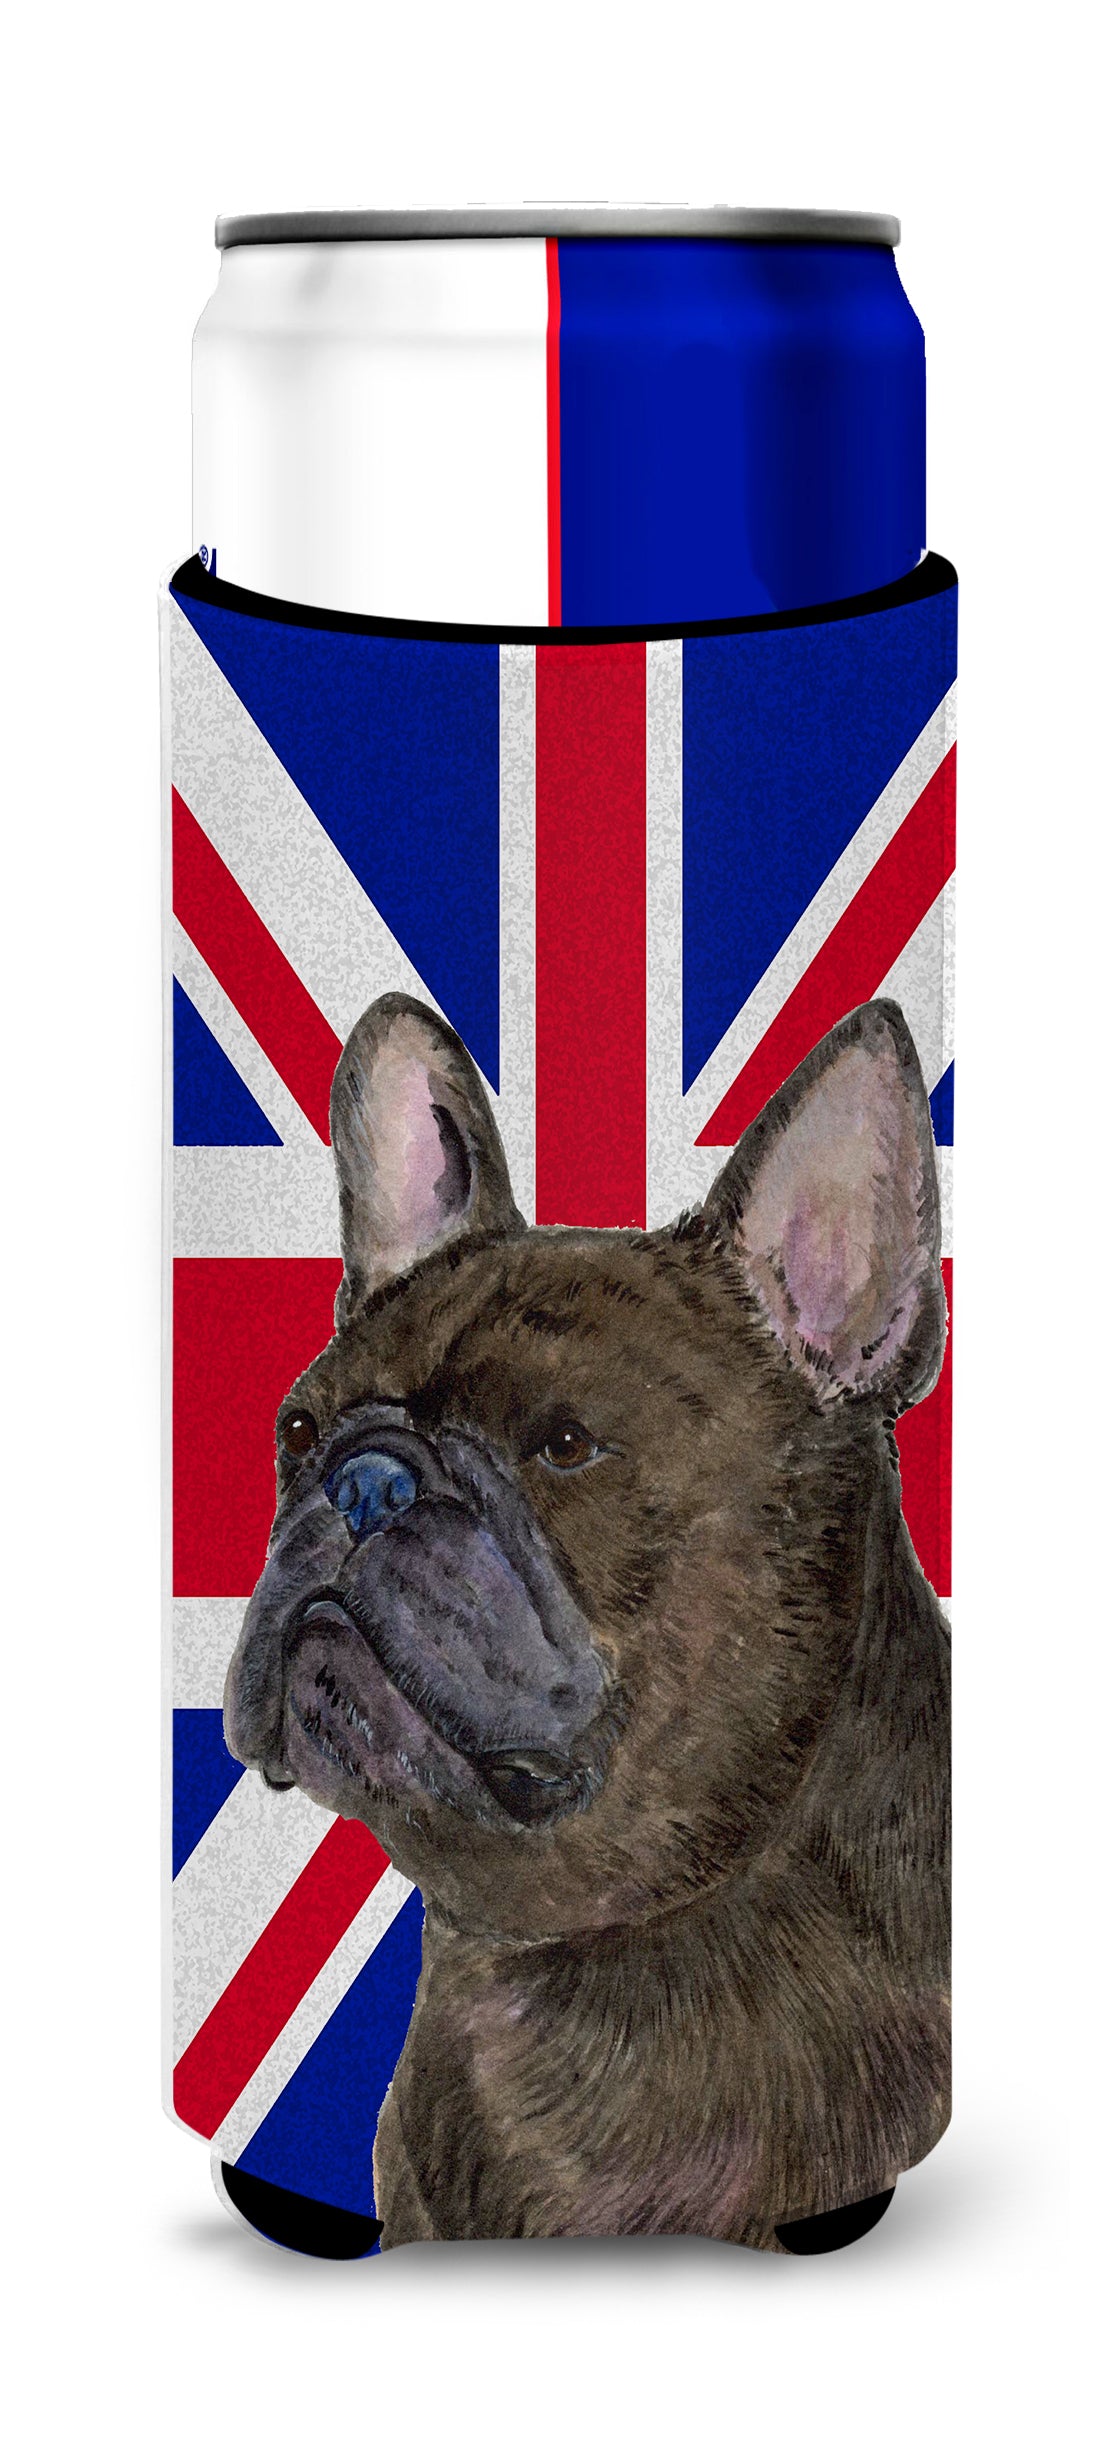 French Bulldog with English Union Jack British Flag Ultra Beverage Insulators for slim cans SS4961MUK.